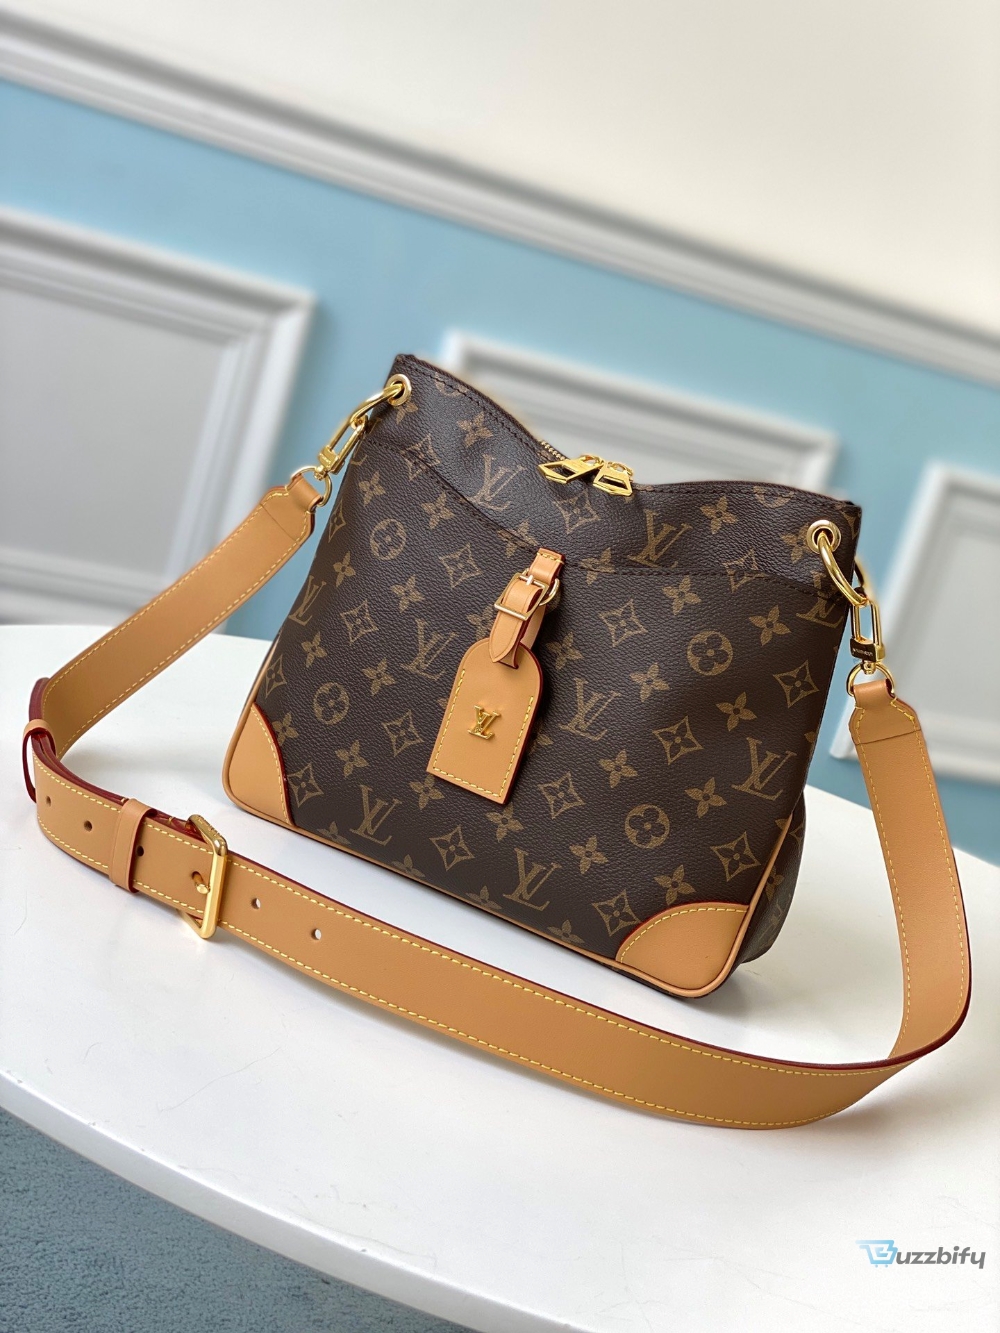 louis vuitton odeon pm monogram canvas natural for fallwinter womens handbags shoulder and crossbody bags 11in28cm lv m45354 2799 buzzbify 1 11